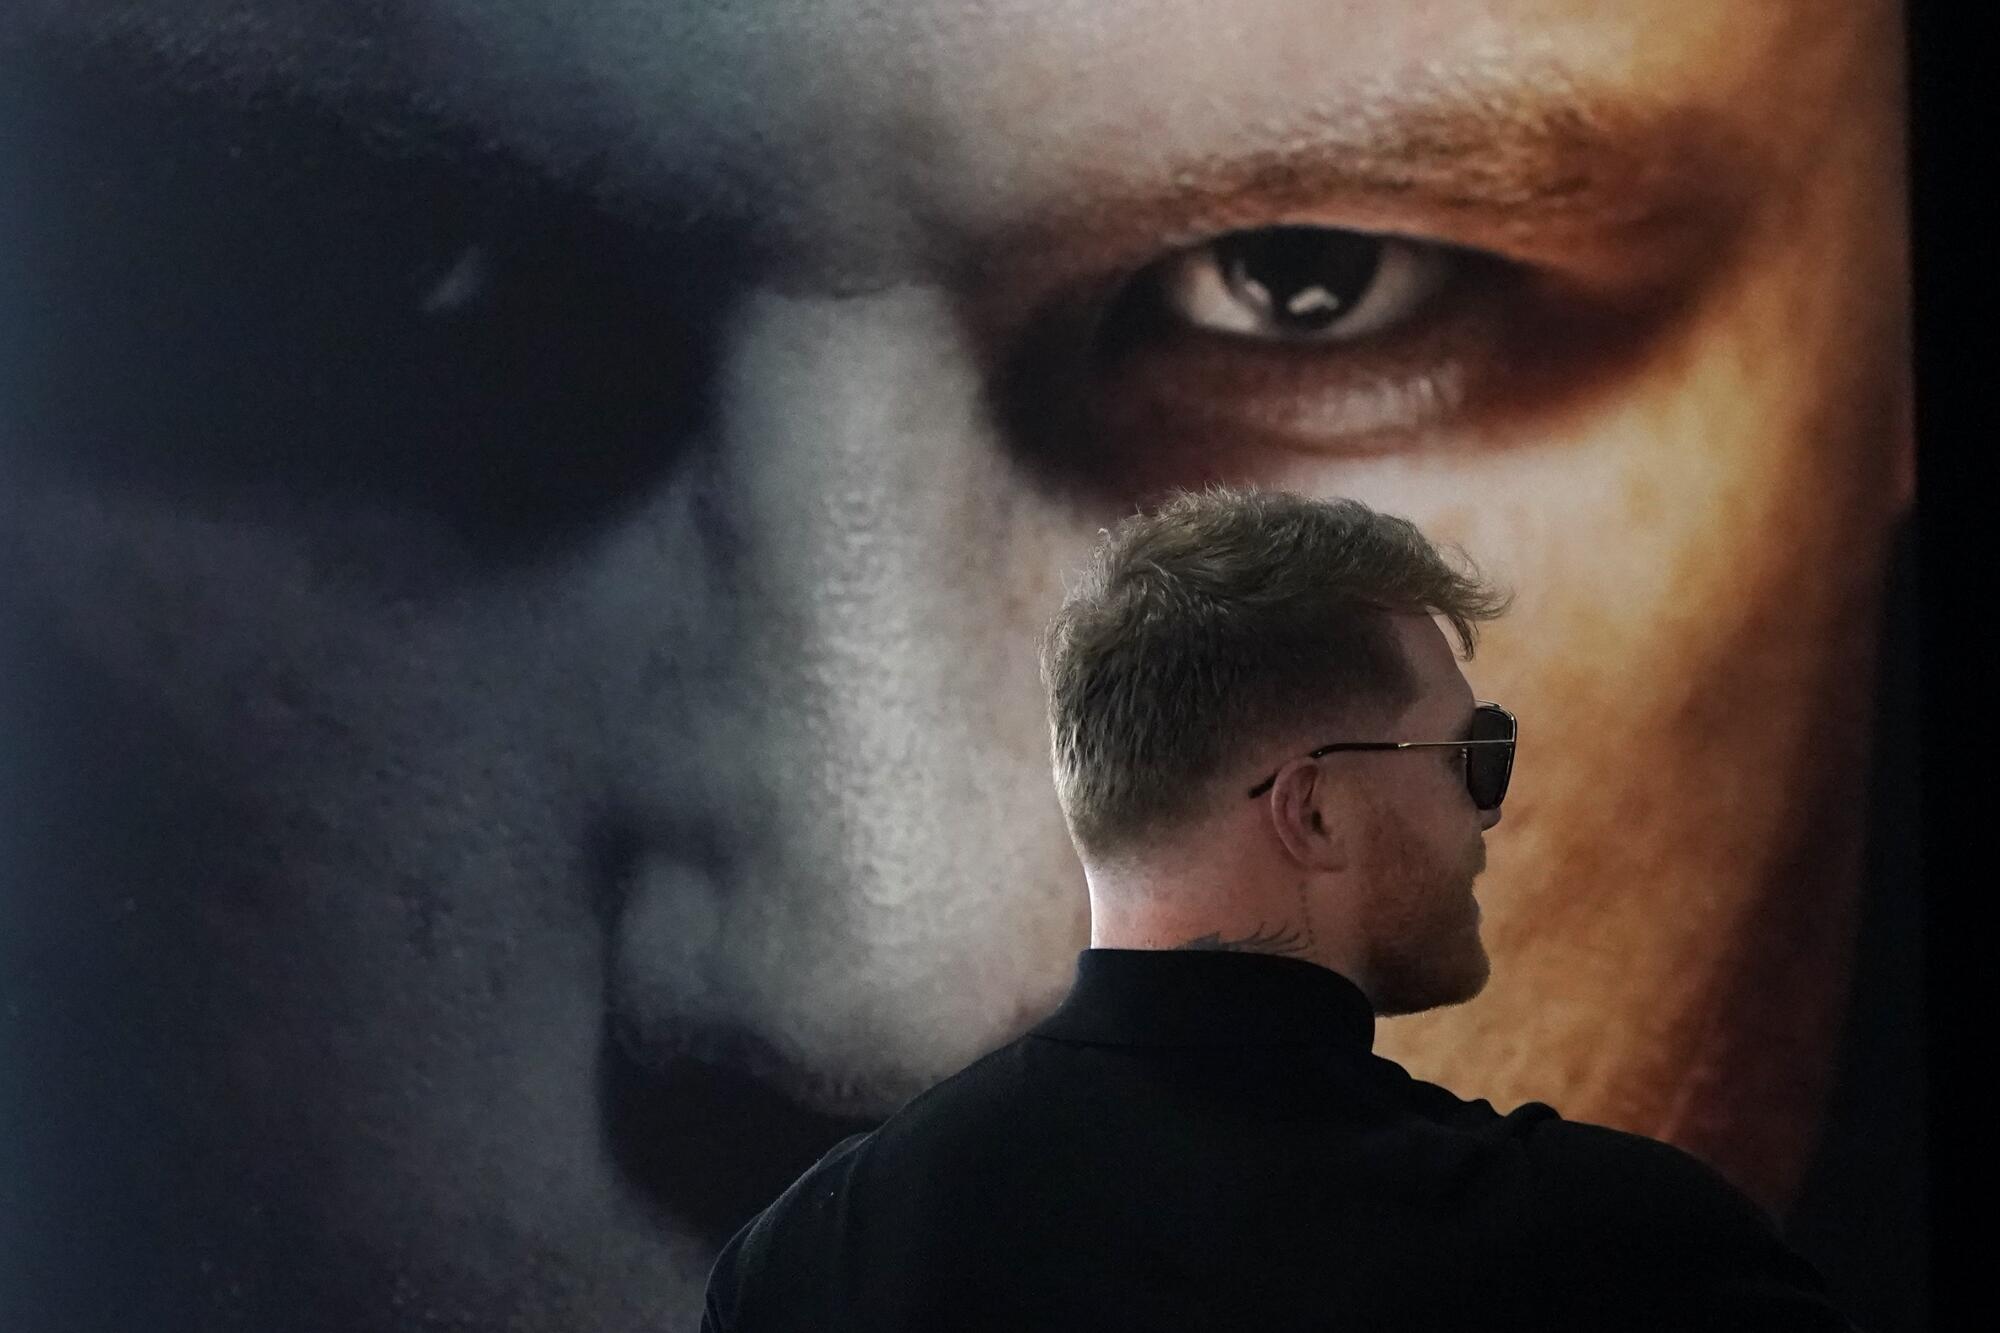 Boxer Canelo Álvarez wears sunglasses and stands facing a poster promoter his fight with Dmitry Bivol.